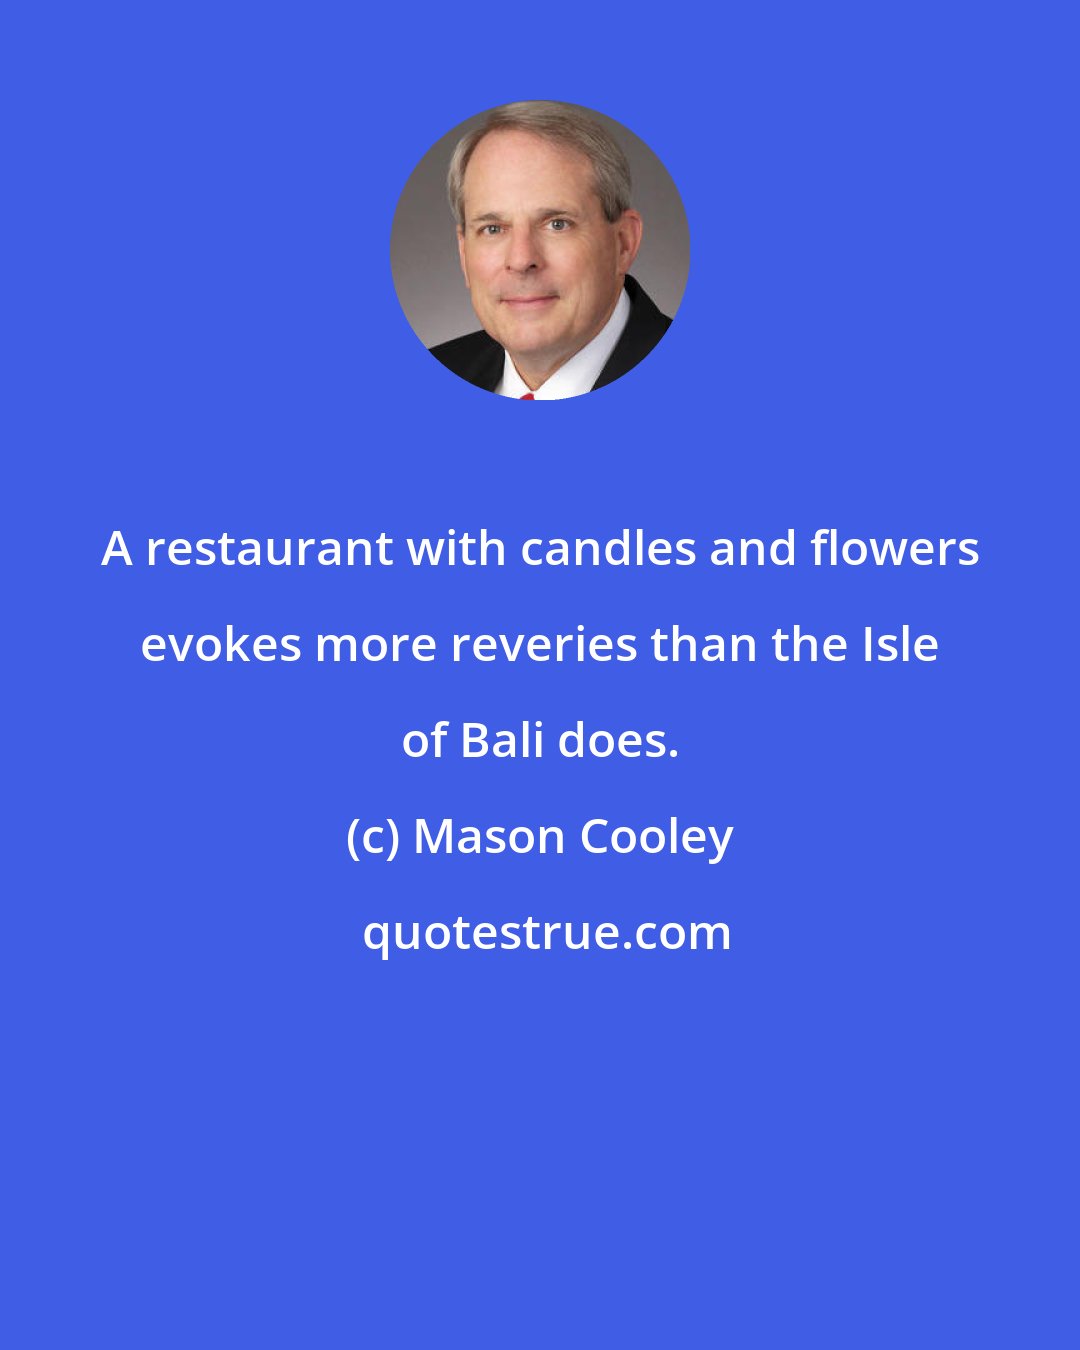 Mason Cooley: A restaurant with candles and flowers evokes more reveries than the Isle of Bali does.